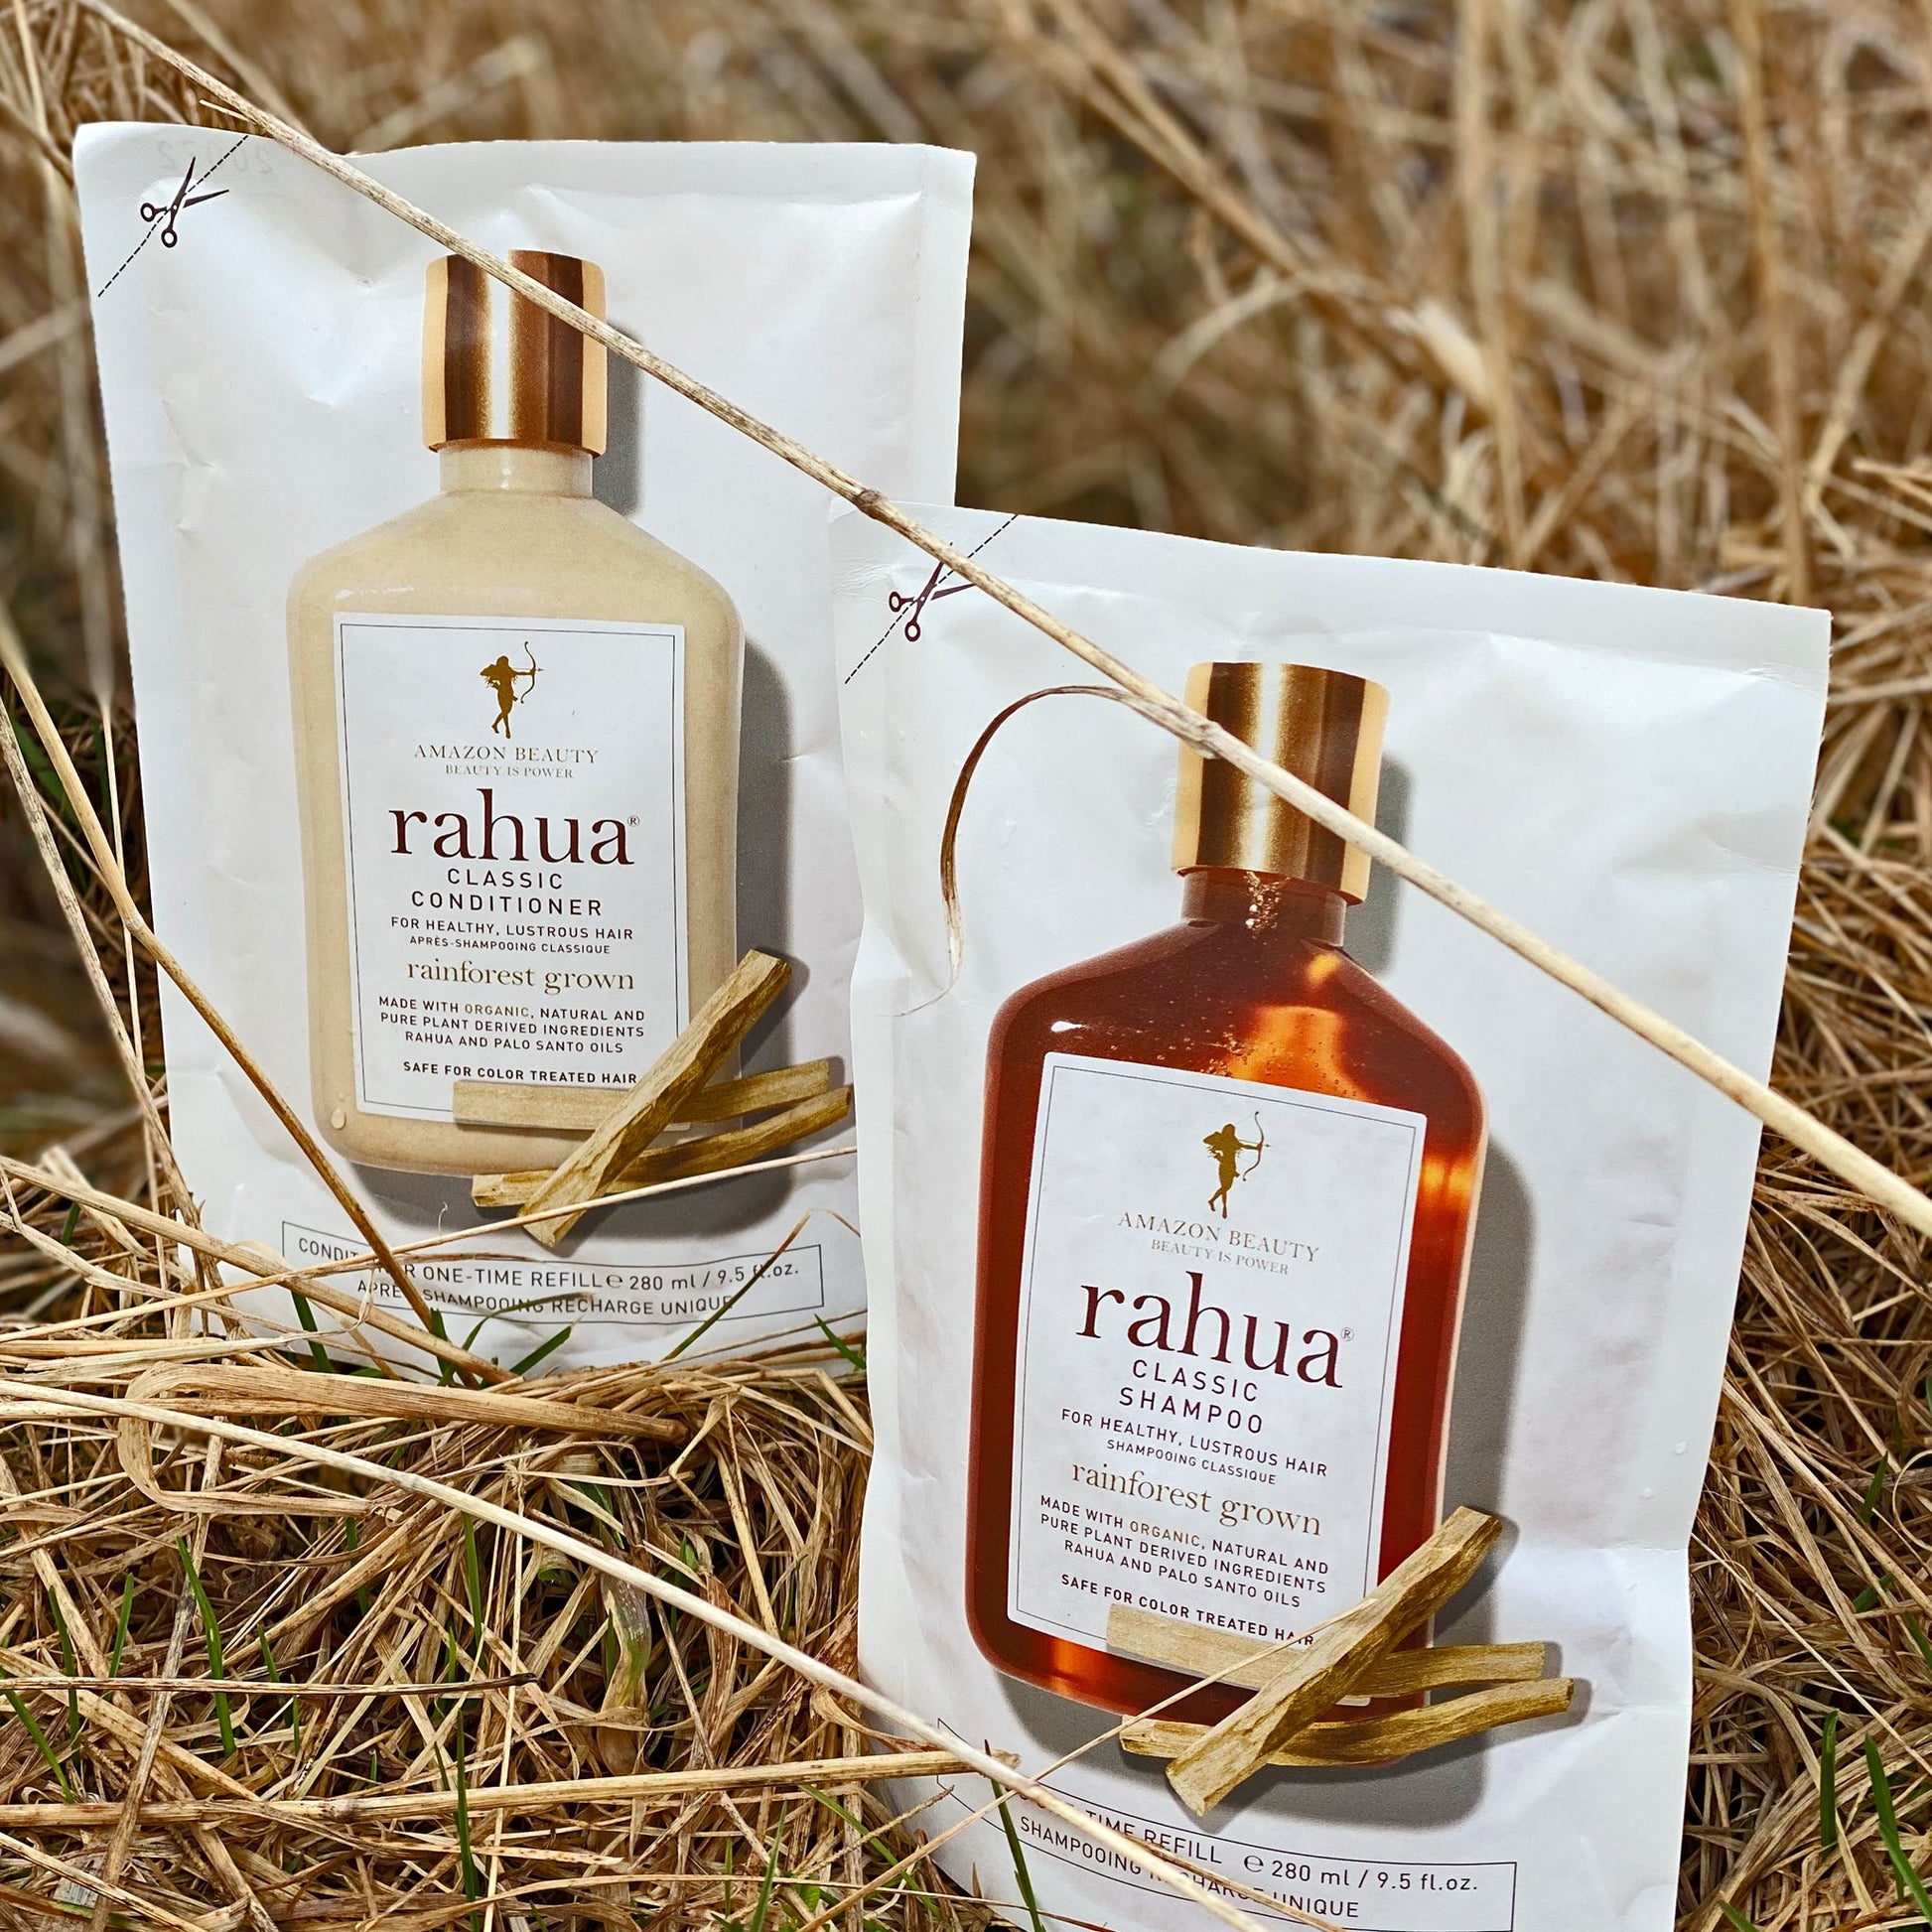 Rahua Classic shampoo refill and classic conditioner refill kept in dry grass